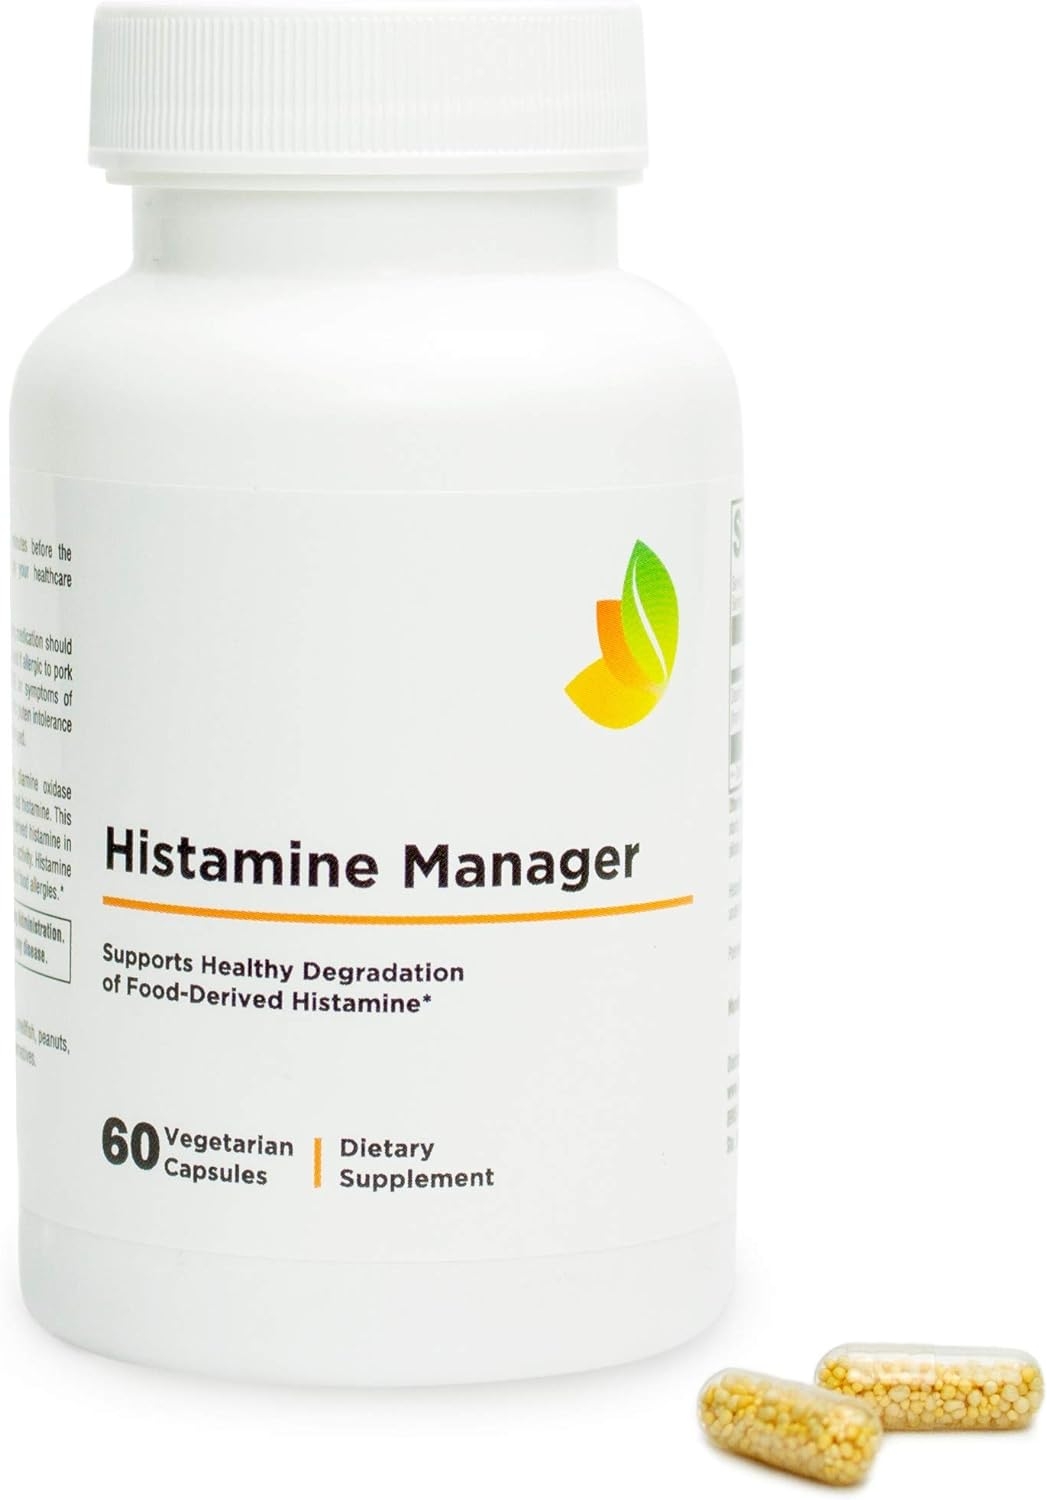 Histamine Manager – 20,000 HDU of Diamine Oxidase DAO per Serving – Digestive Enzyme to Help Block and Manage Food-Derived Histamine Intolerance – 60 Capsules (1 Bottle)